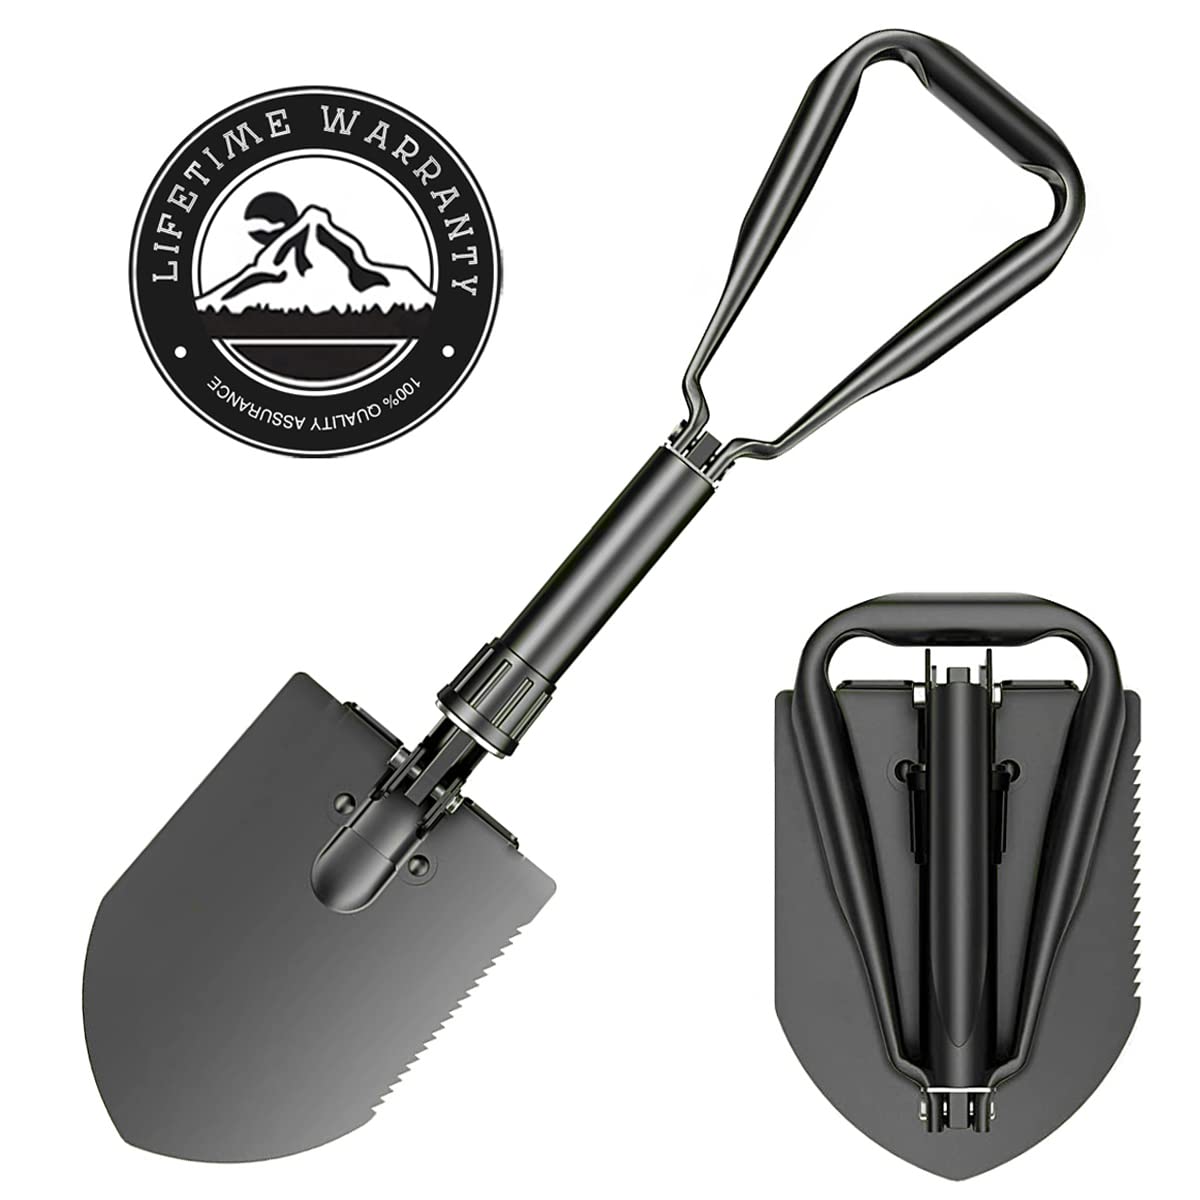 Behandy Collapsible Shovel, Heavy Duty Foldable Shovel, Camping Shovel And Pickax, Military Entrenching Tool For Gardening, Camp